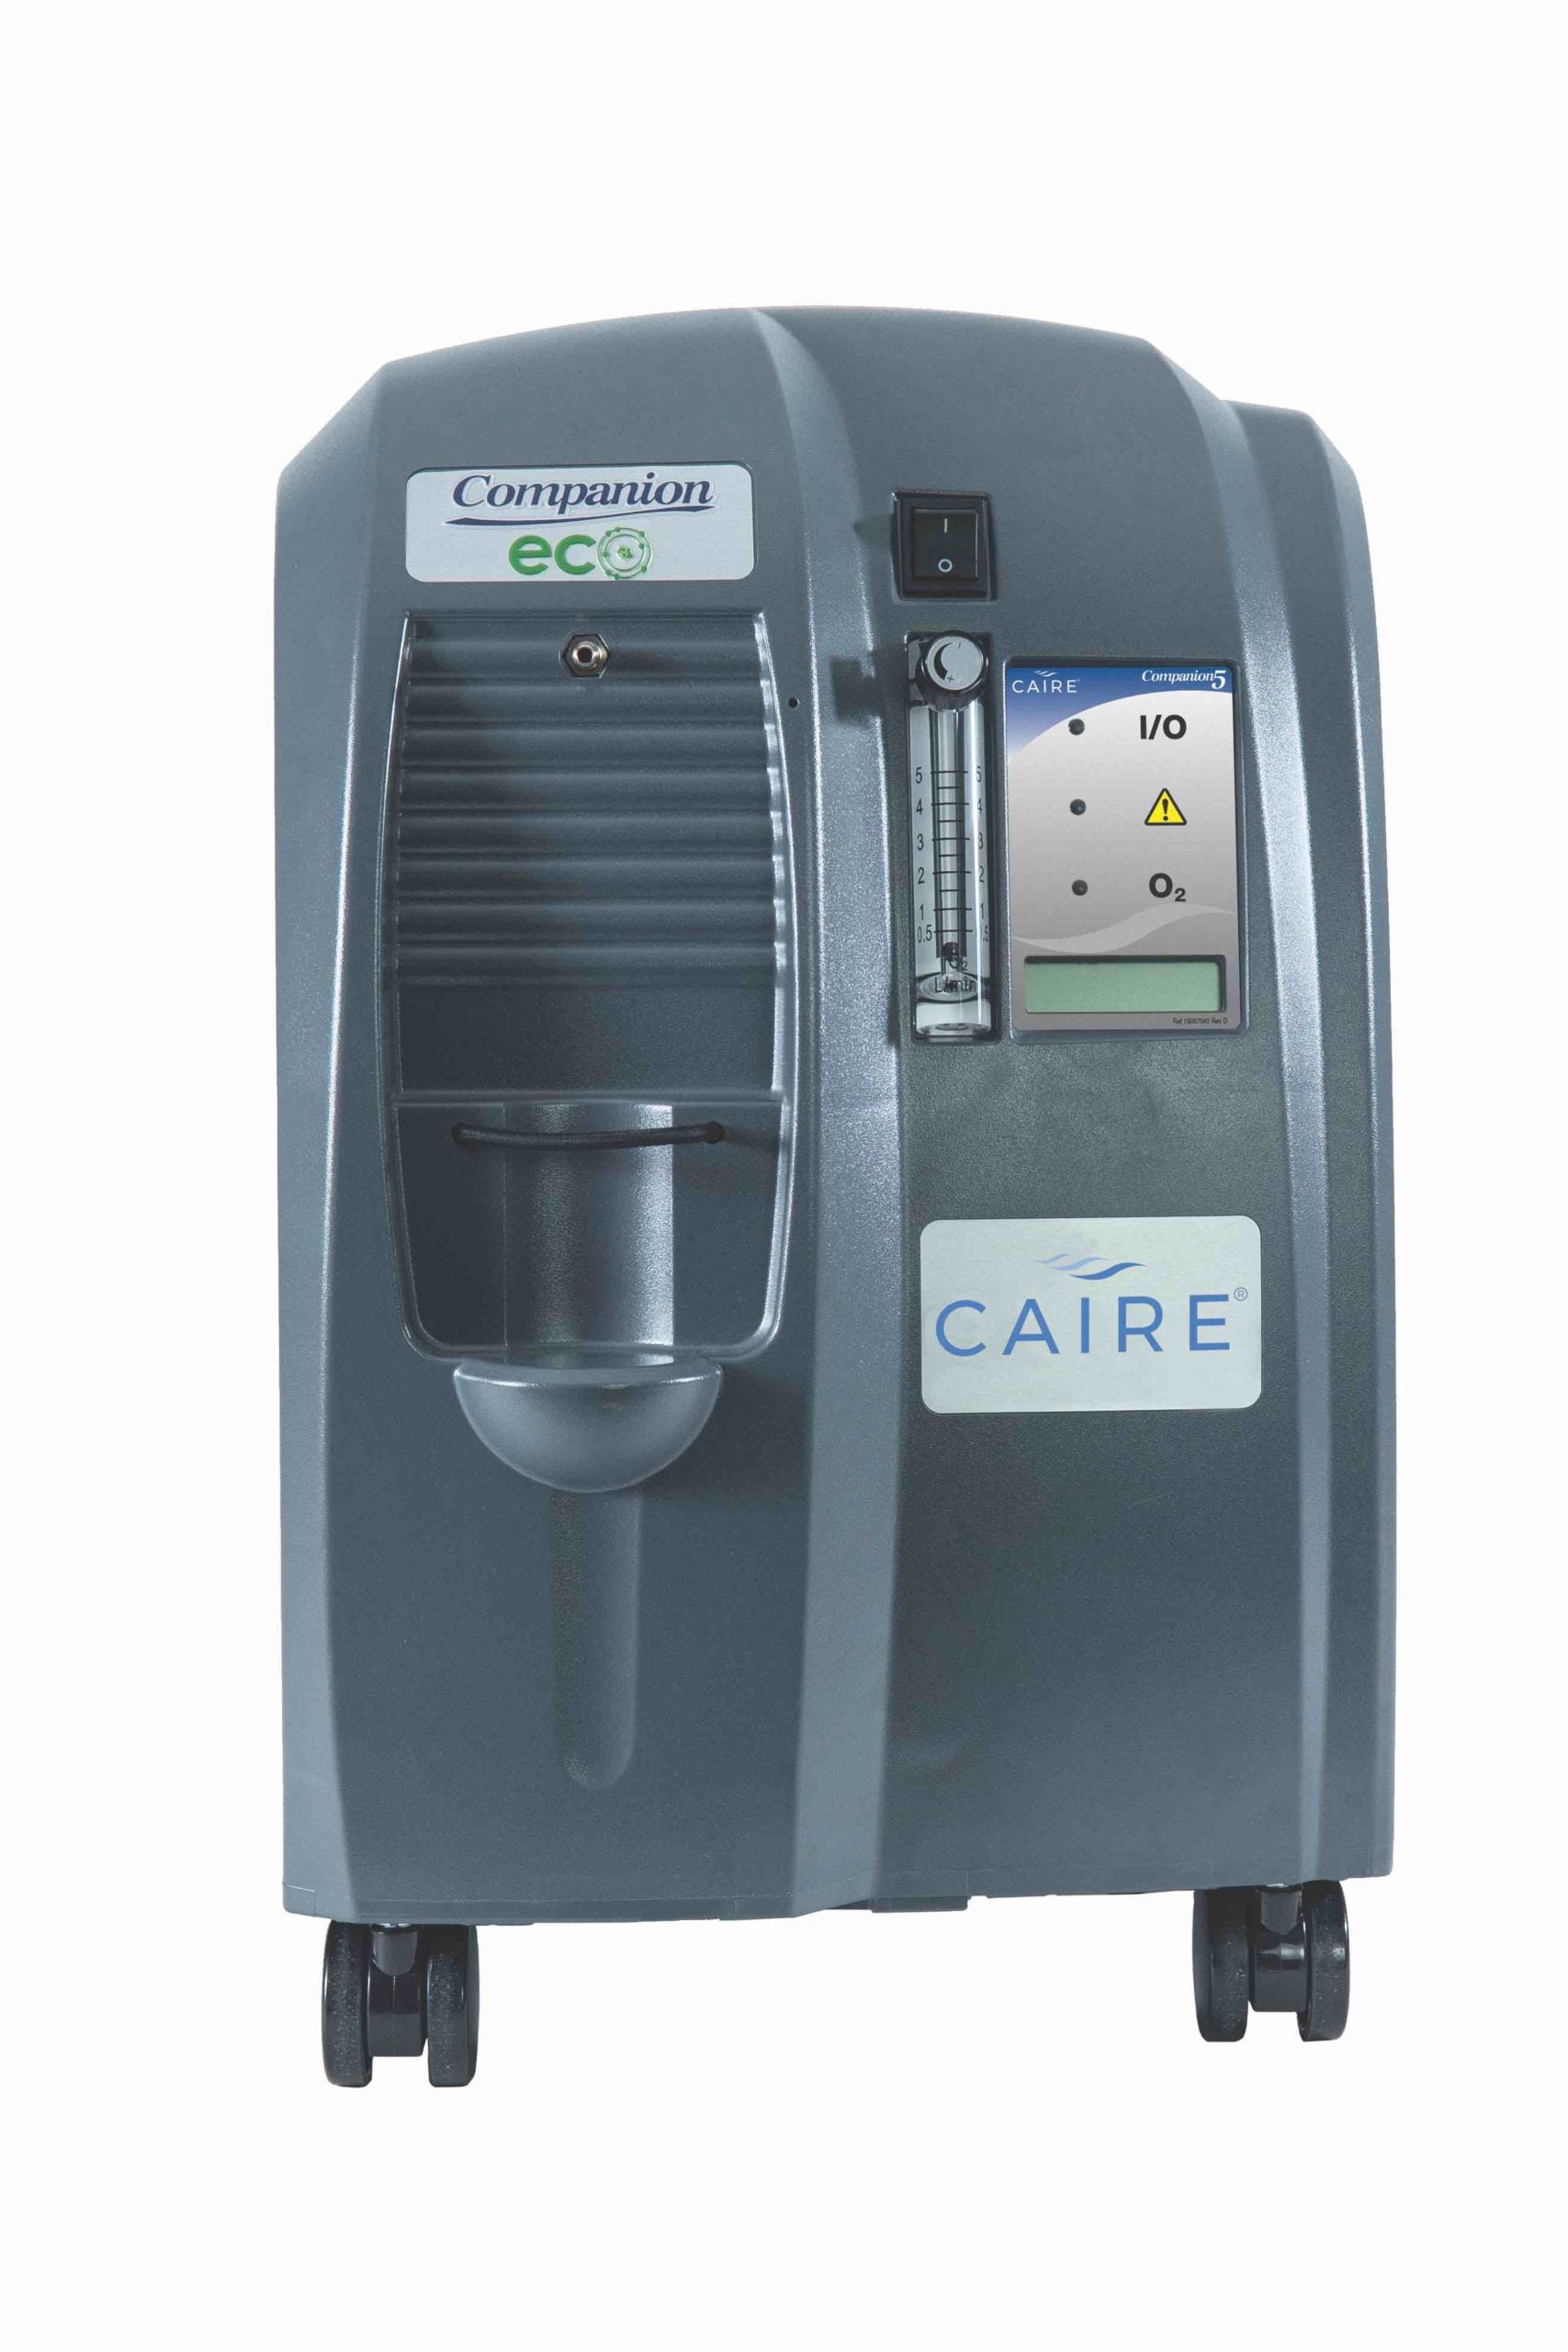 Companion stationary oxygen concentrator by Caire